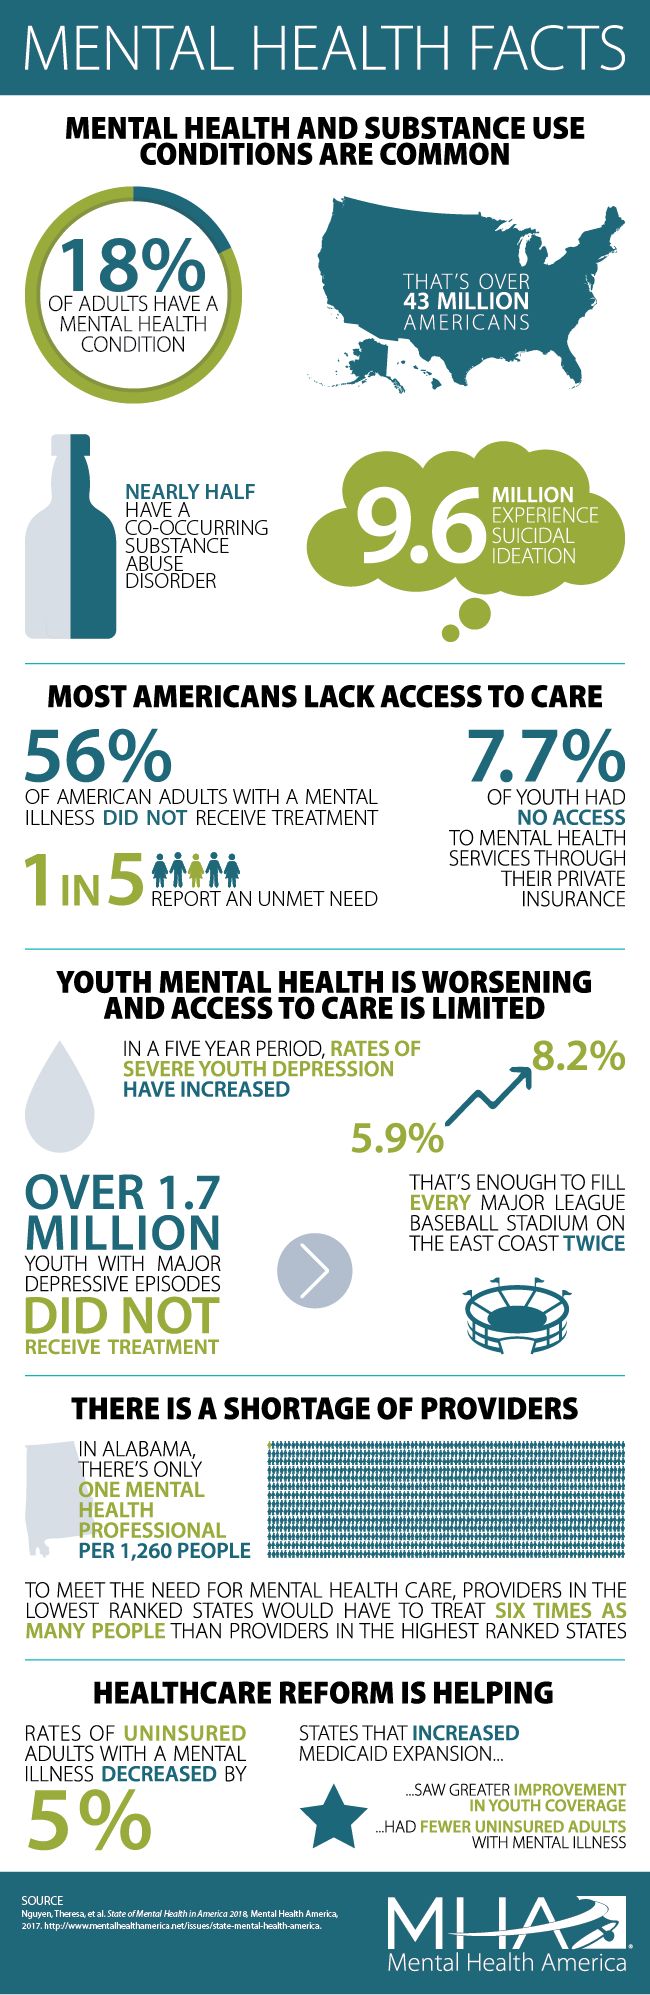 The overall findings from the 2018 State of Mental Health Report published by Mental Health America.